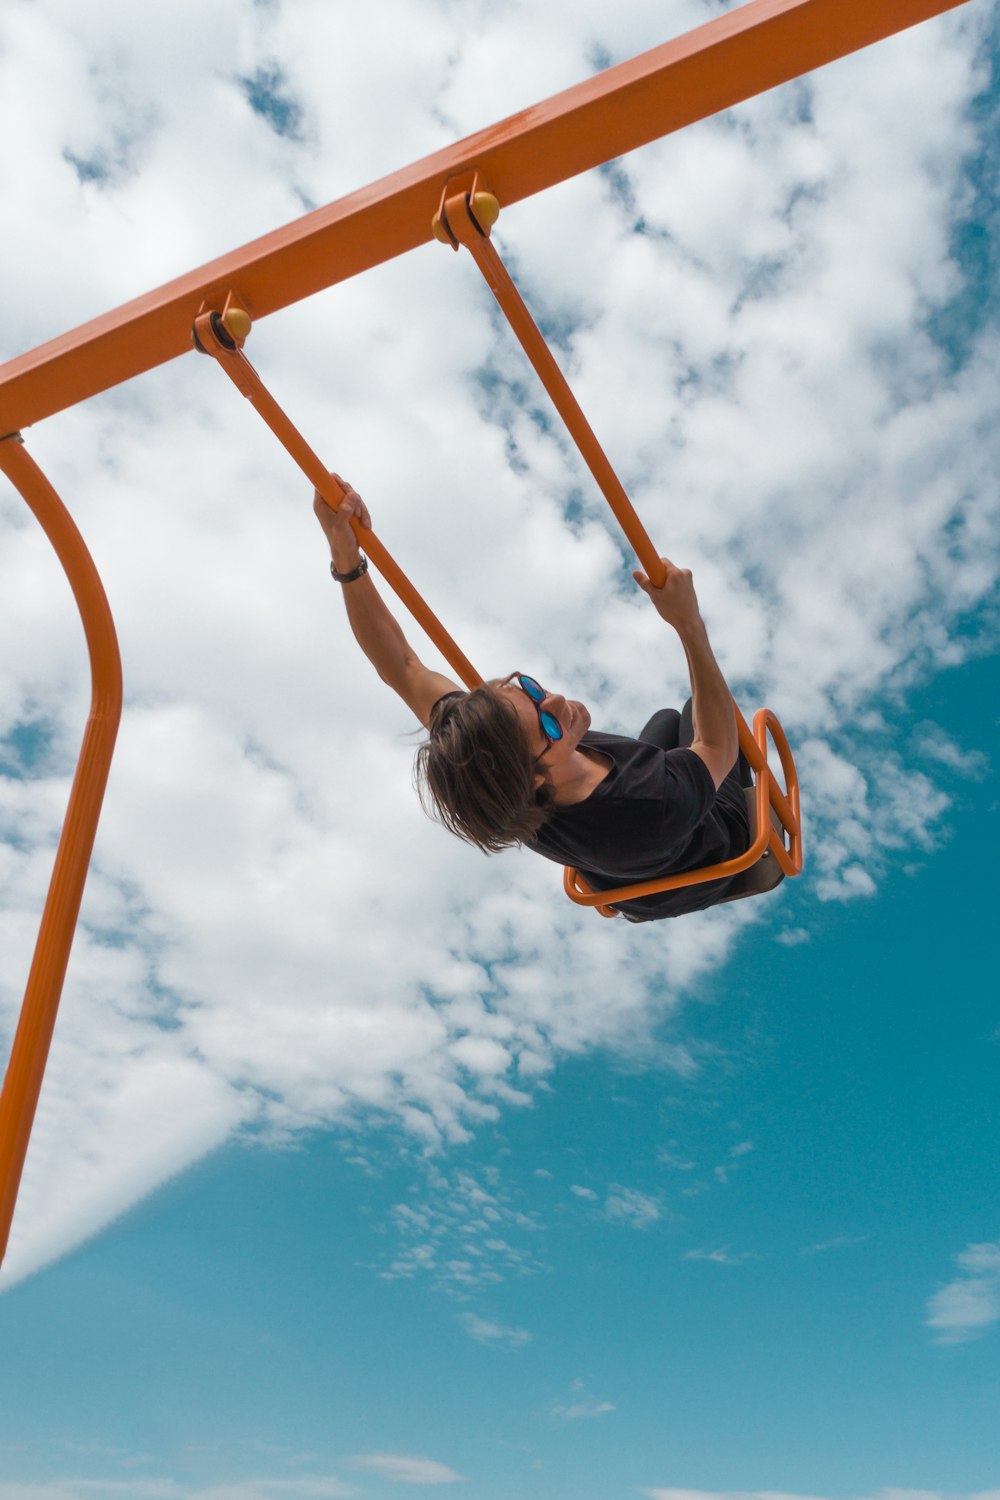 girl in black shirt and blue denim jeans riding on orange swing under blue and white